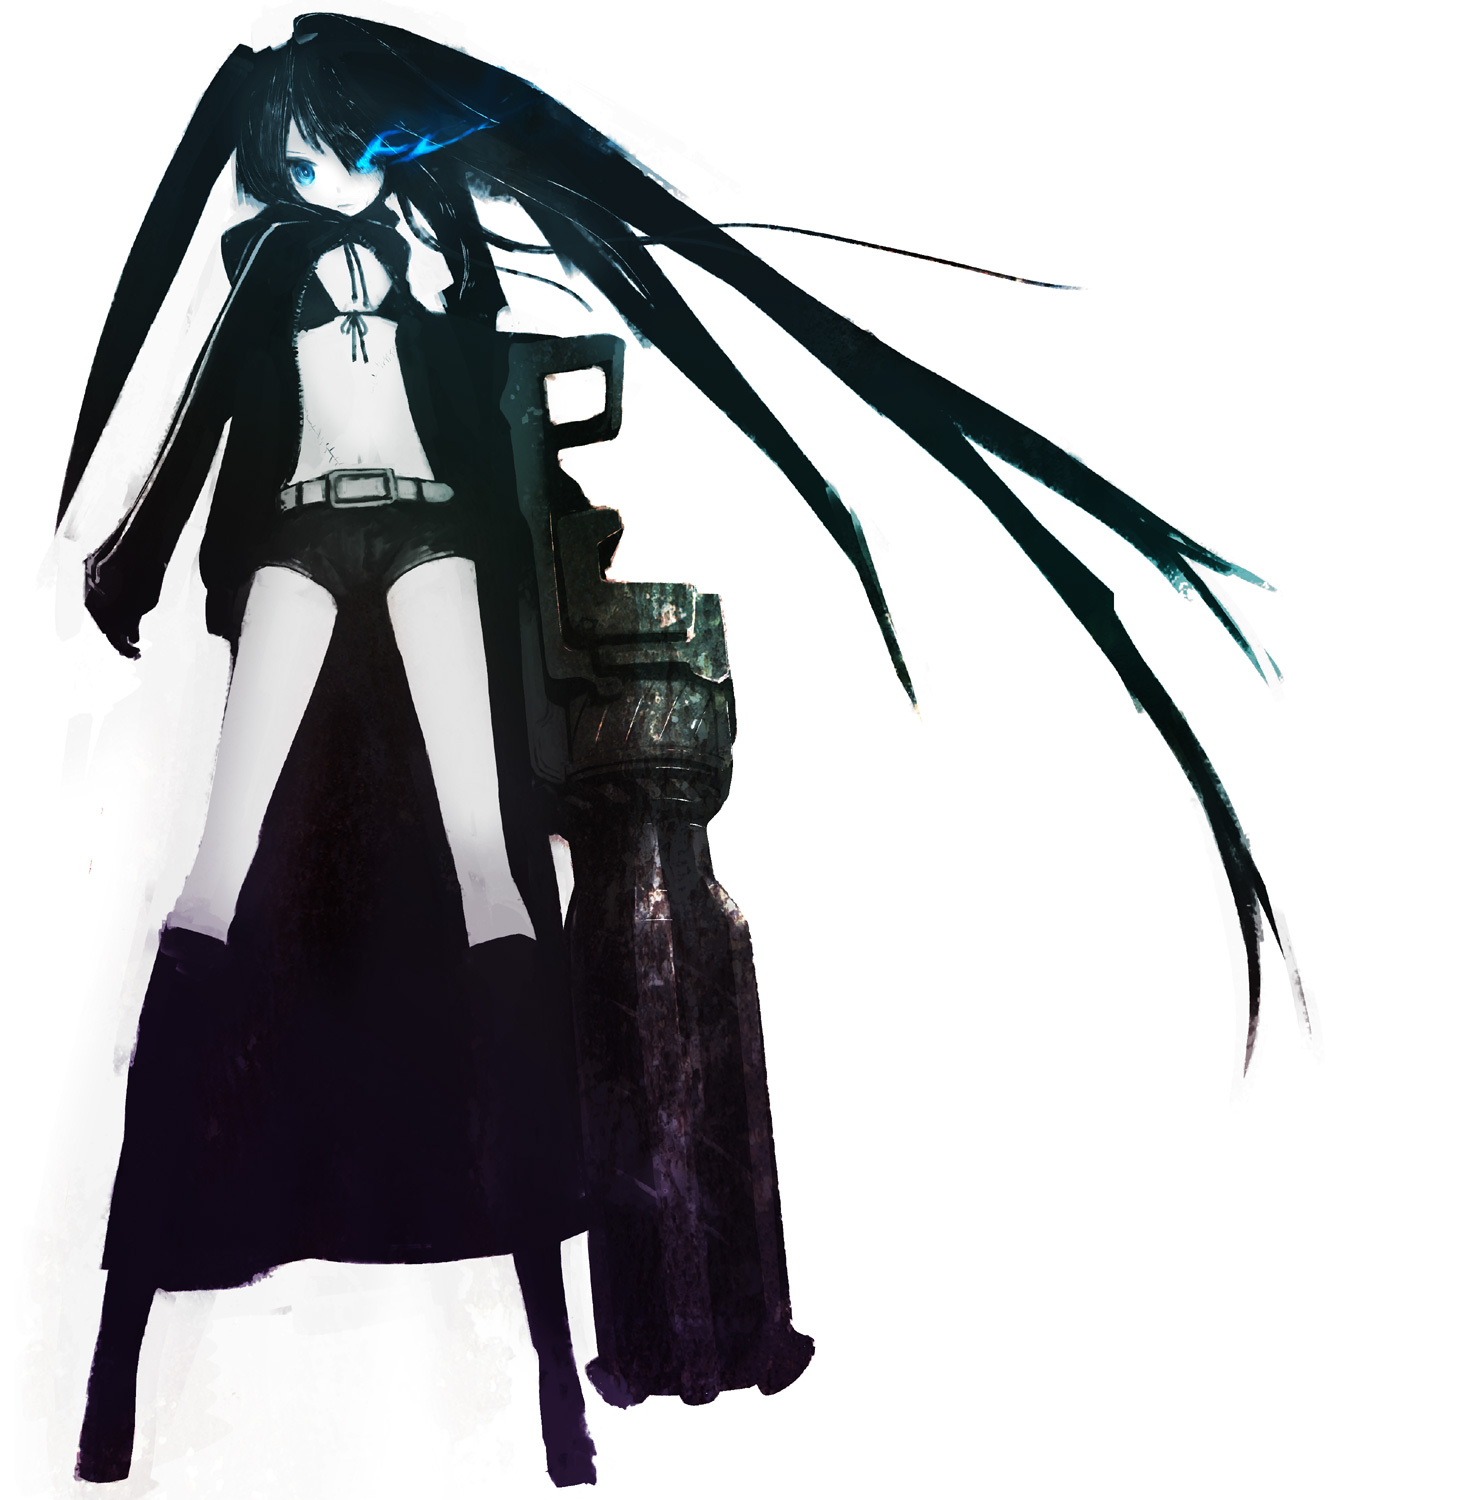 Black Rock Shooter Anime Encyclopedia Characters Setting Release Dates 